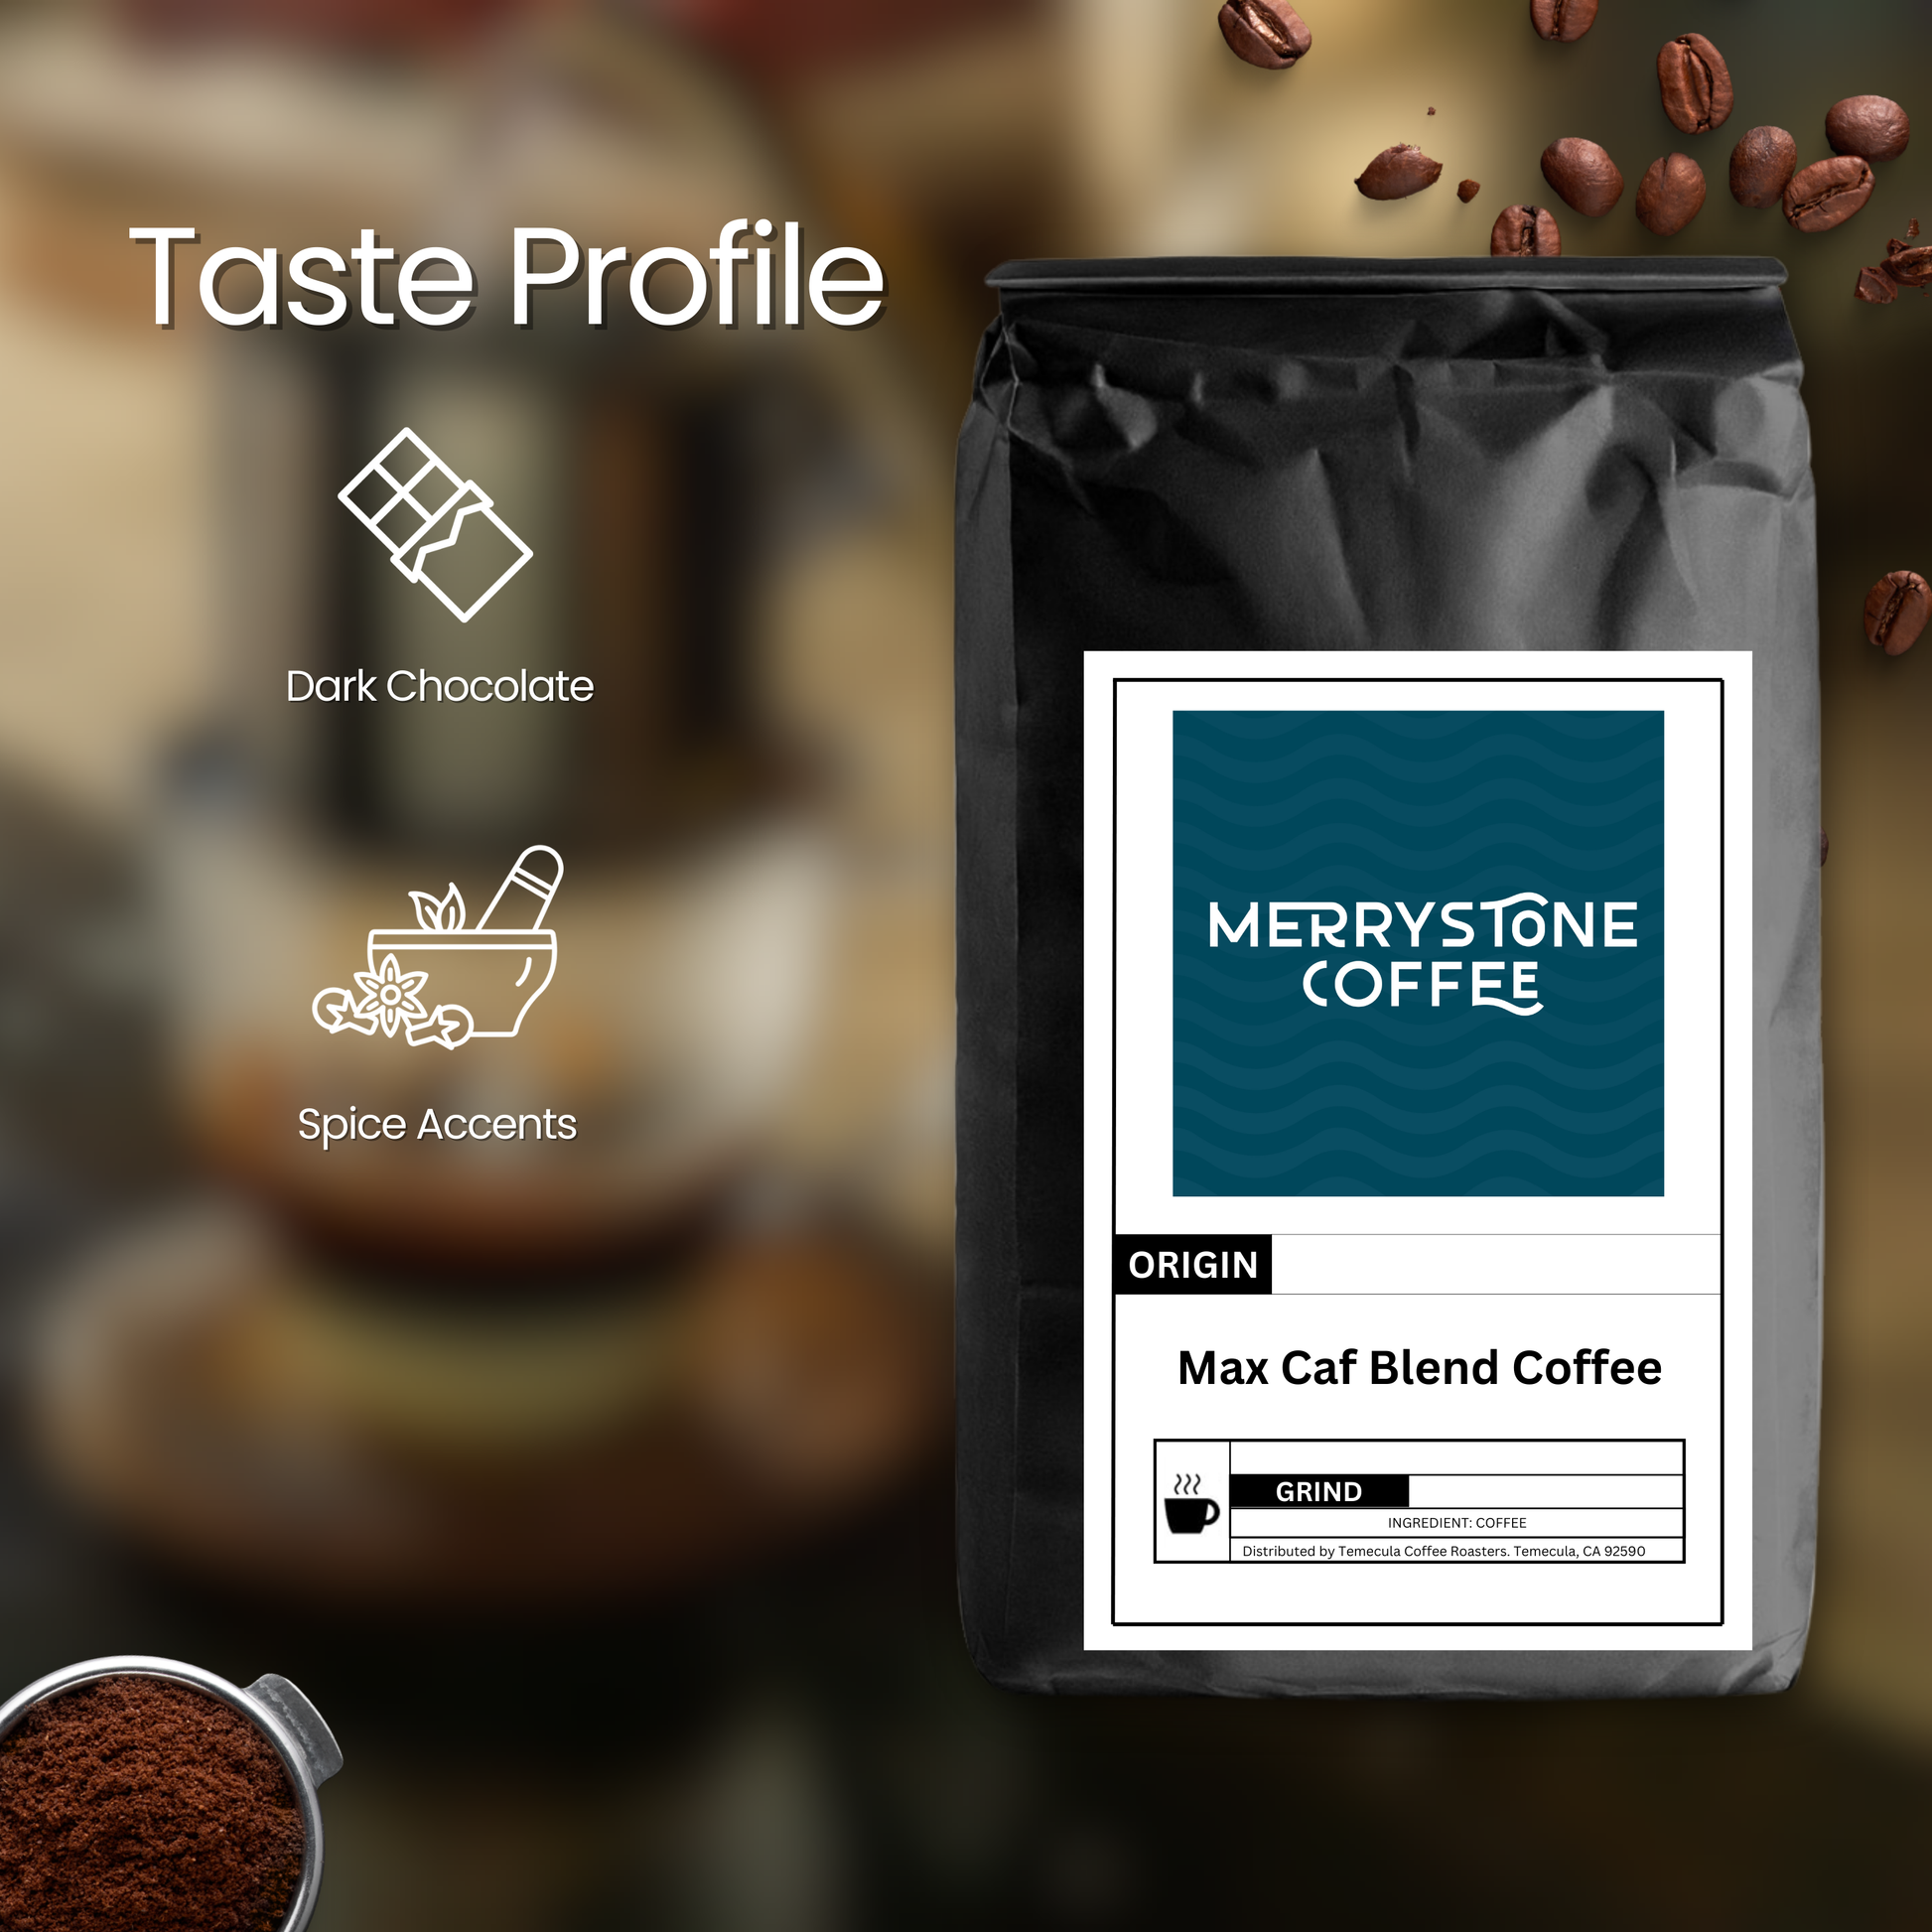 Max Caf Blended Coffee - Merrystone Coffee